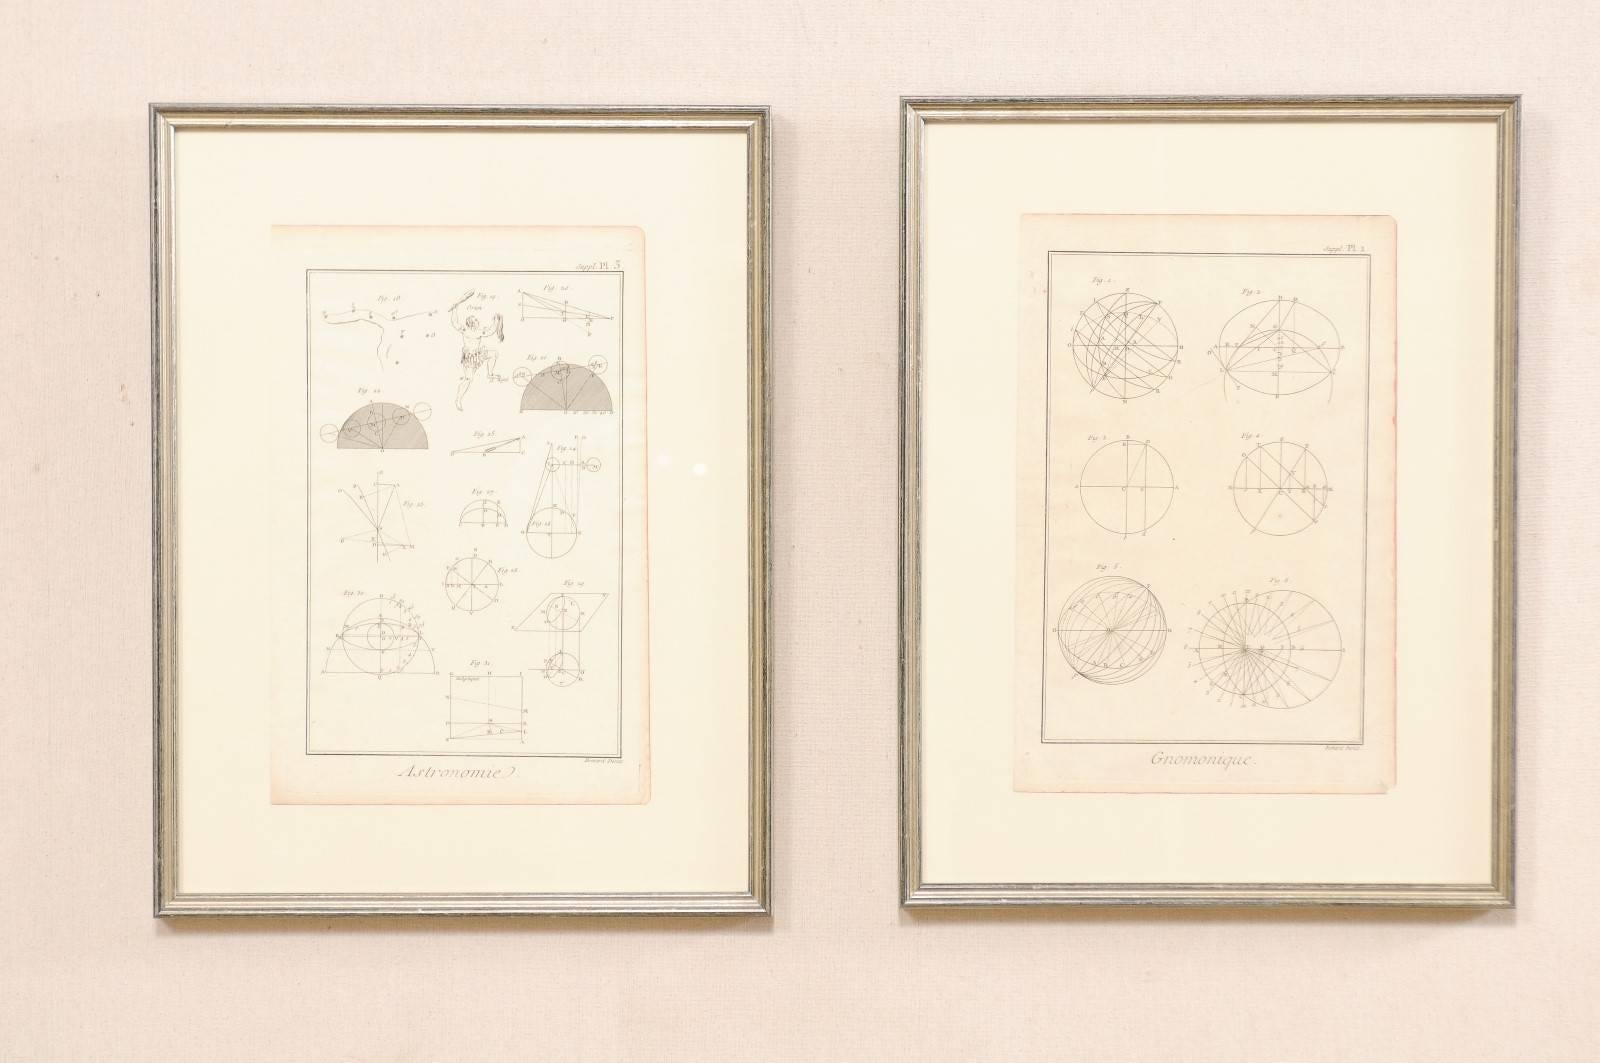 A pair of framed French 18th century Bernard Direx renderings. This is a pair of framed astronomy and geometric renderings from French artist Bernard Direx. Each rendering was originally part of a larger book, and are copper plate engraved (a